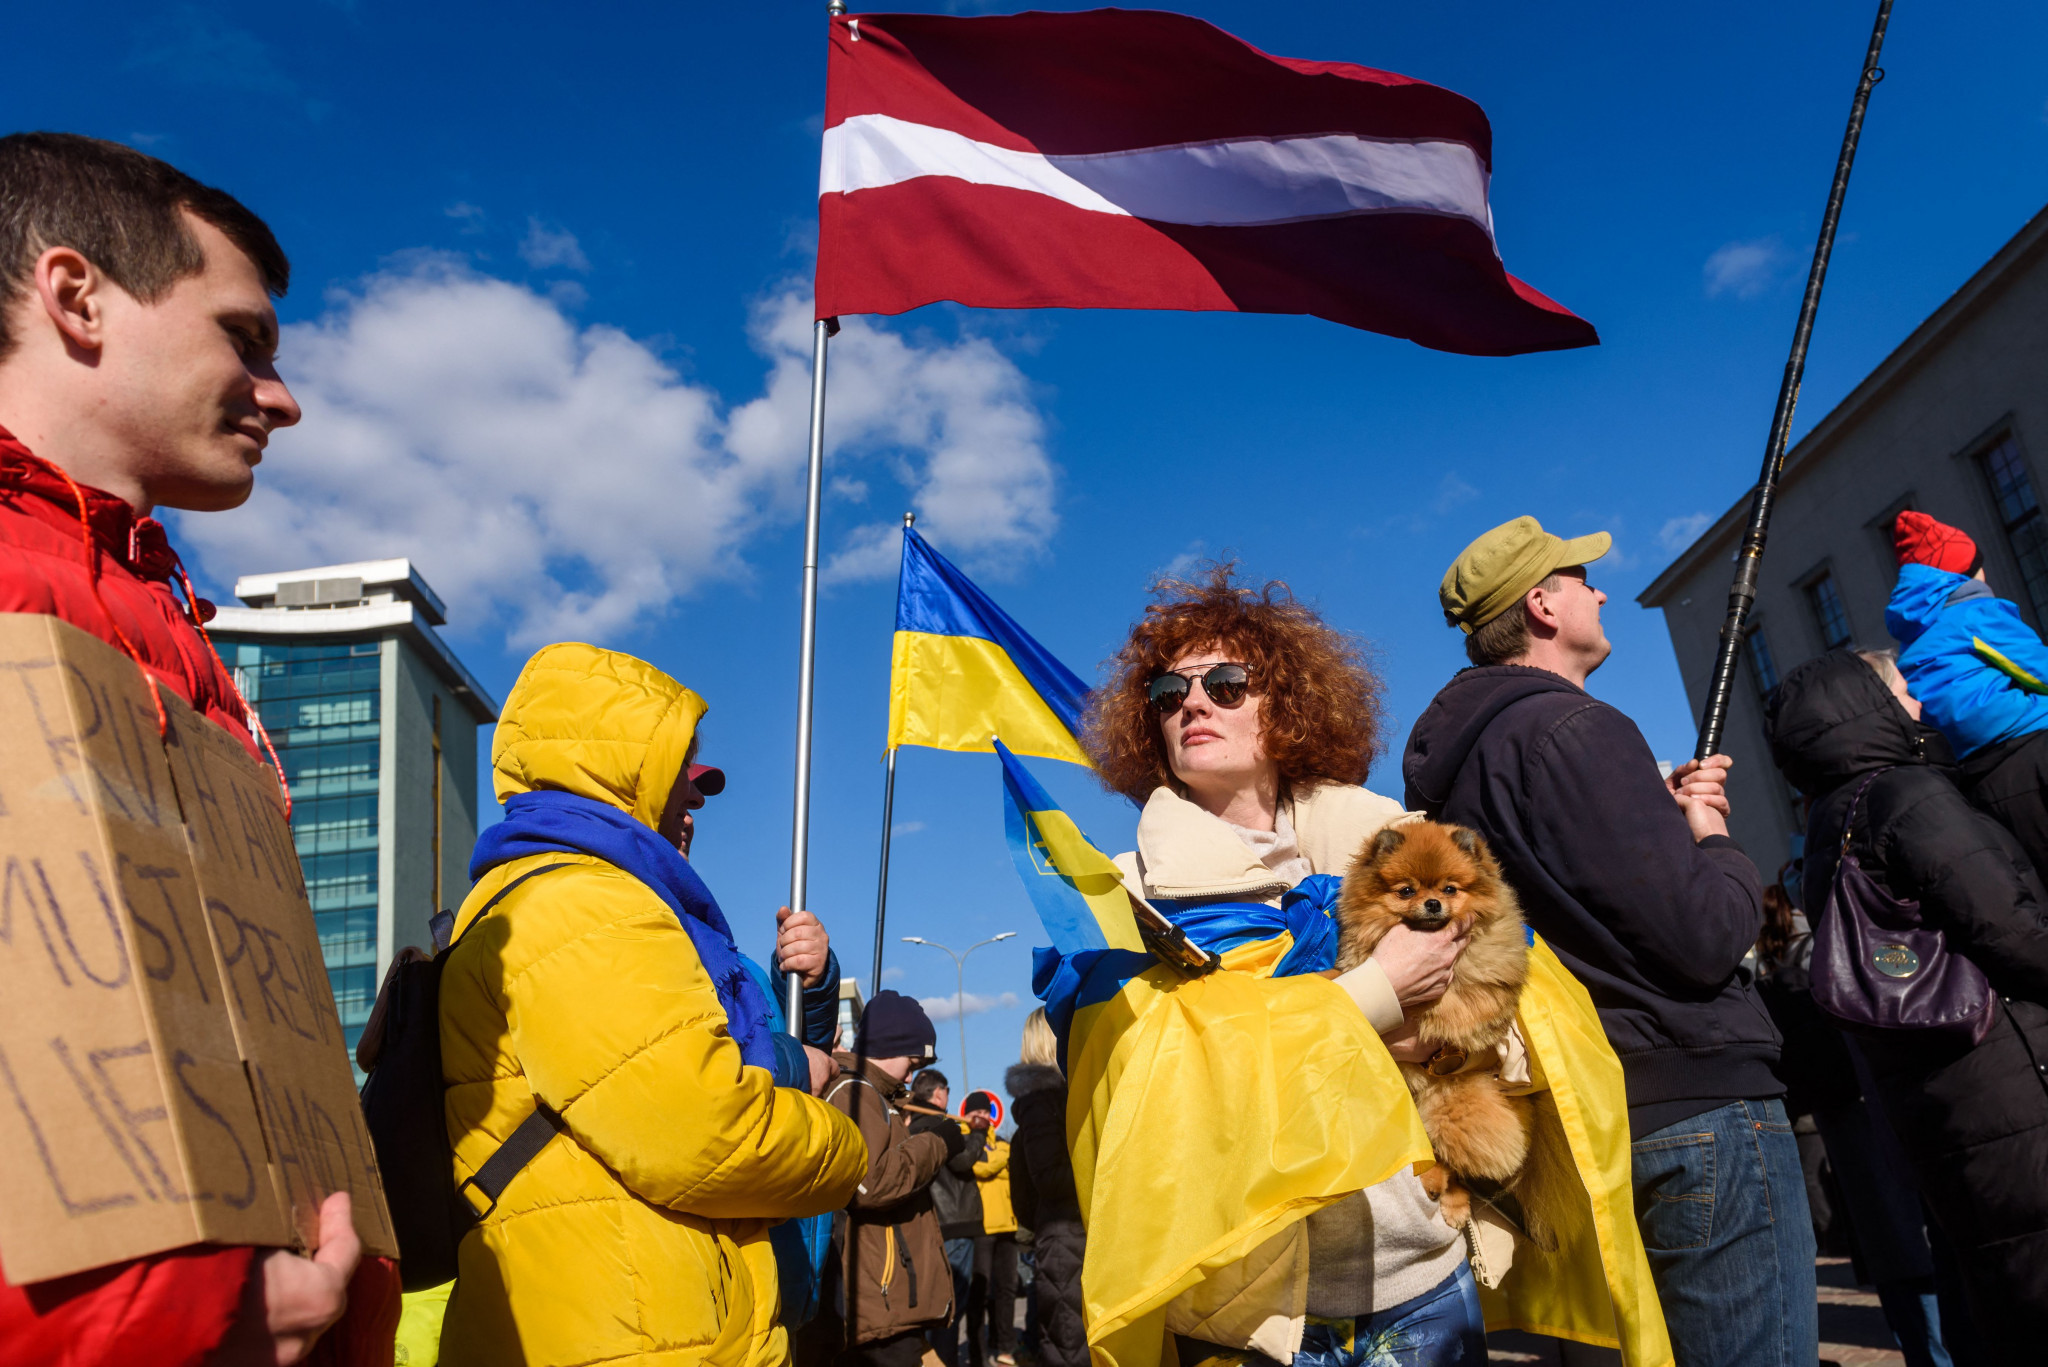 Latvian sports journalists call for May 9 events to be ignored after Ukraine invasion